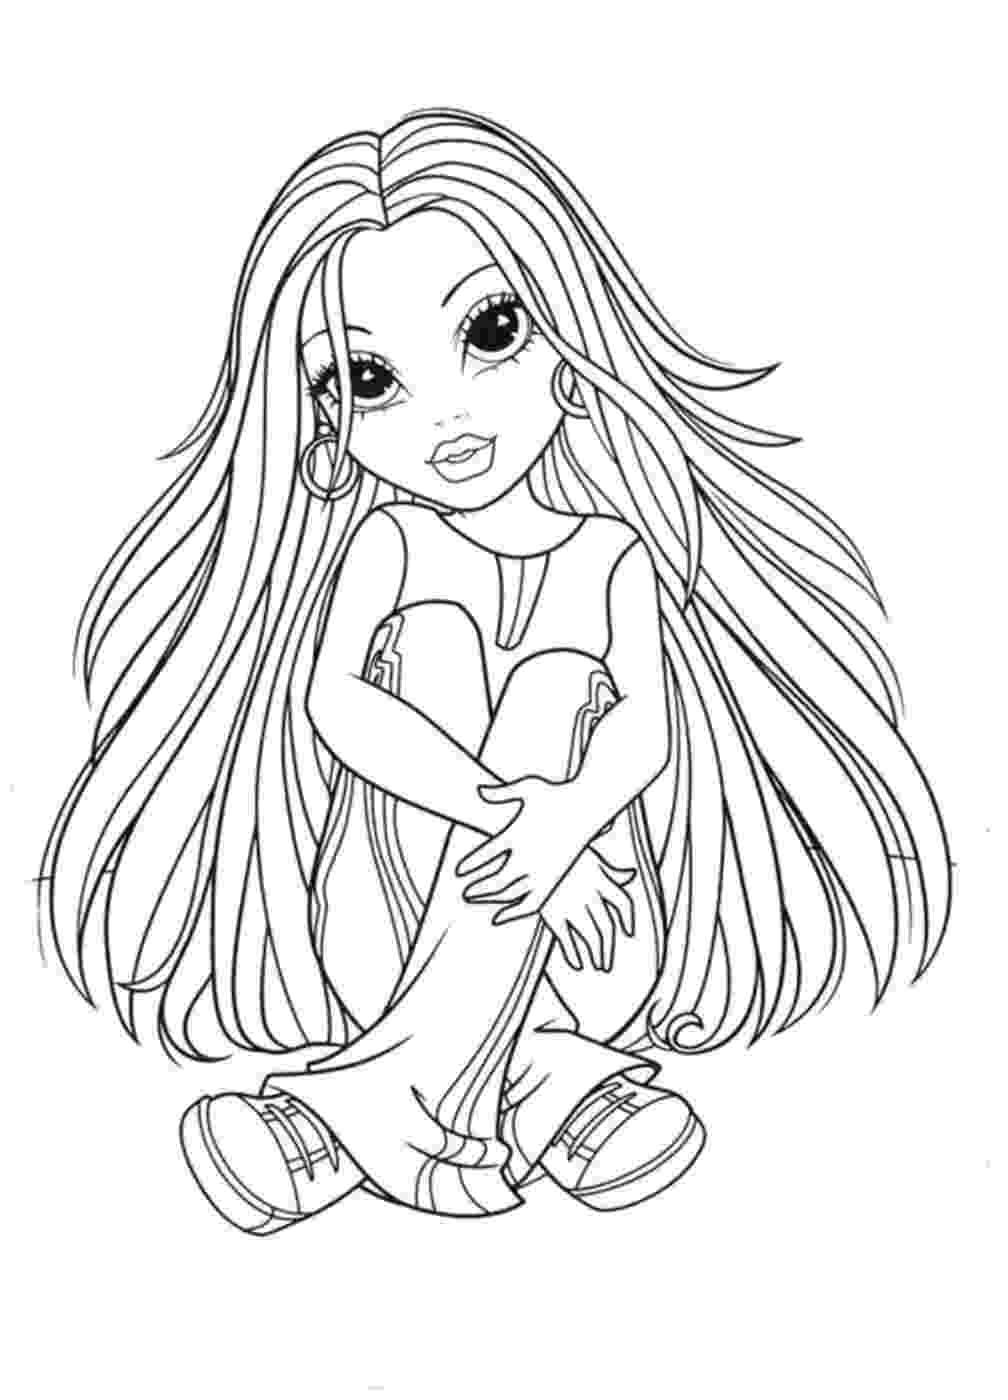 american girl doll free coloring pages free printable american girl doll coloring pages american doll pages american free coloring girl 